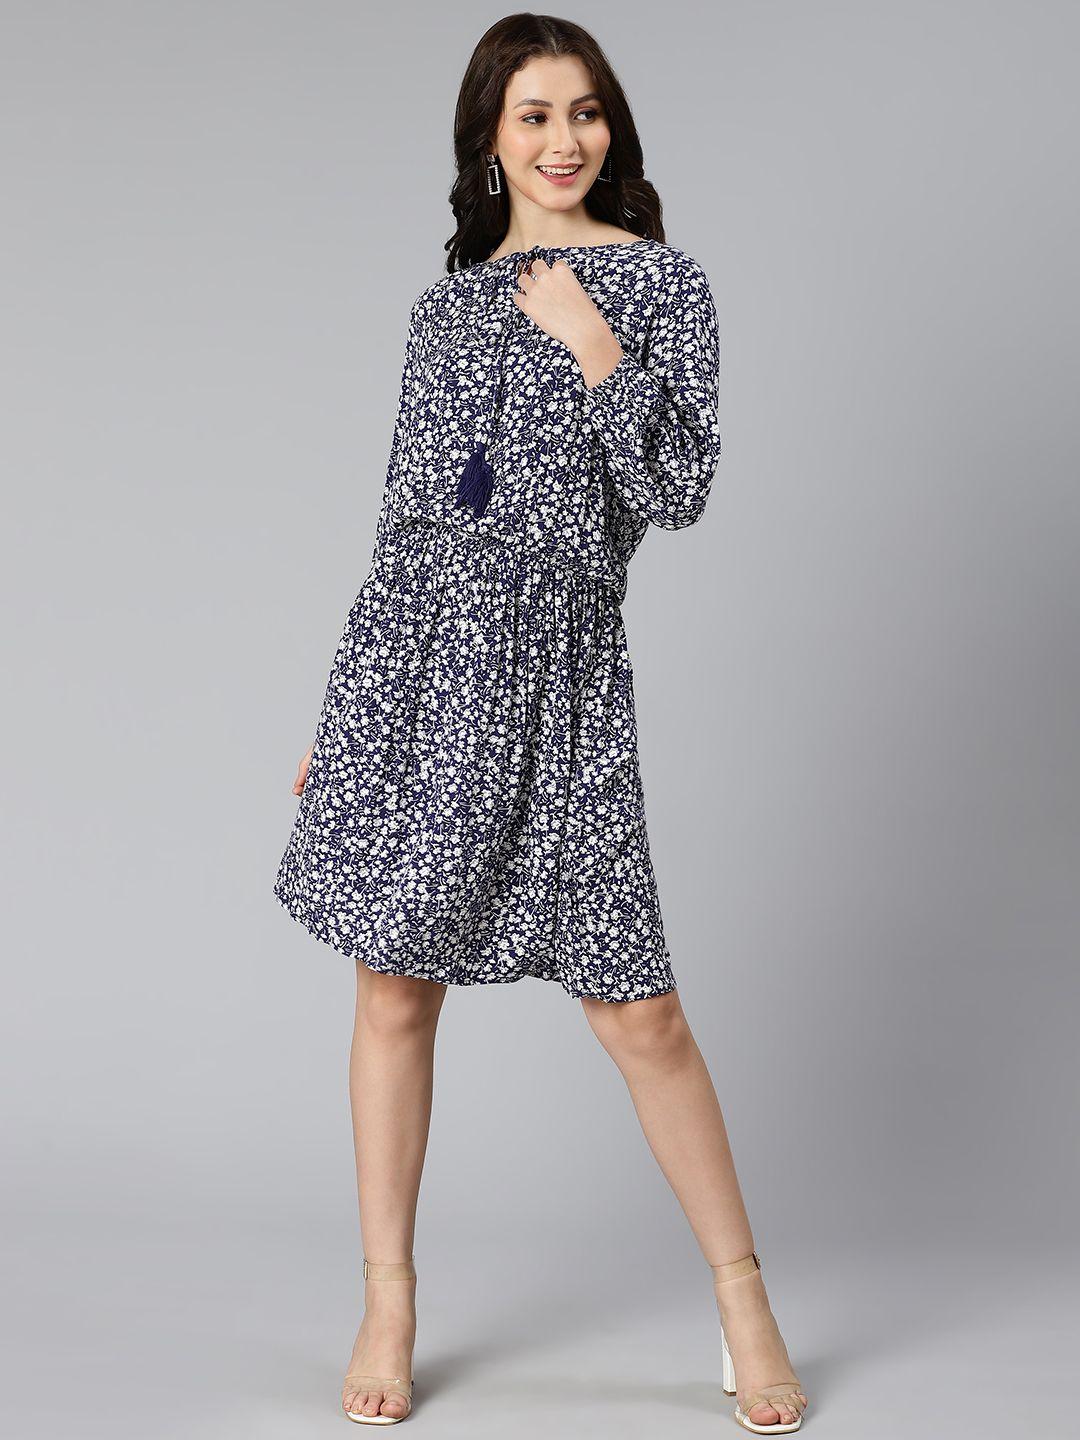 oxolloxo blue & white floral print crepe a-line dress